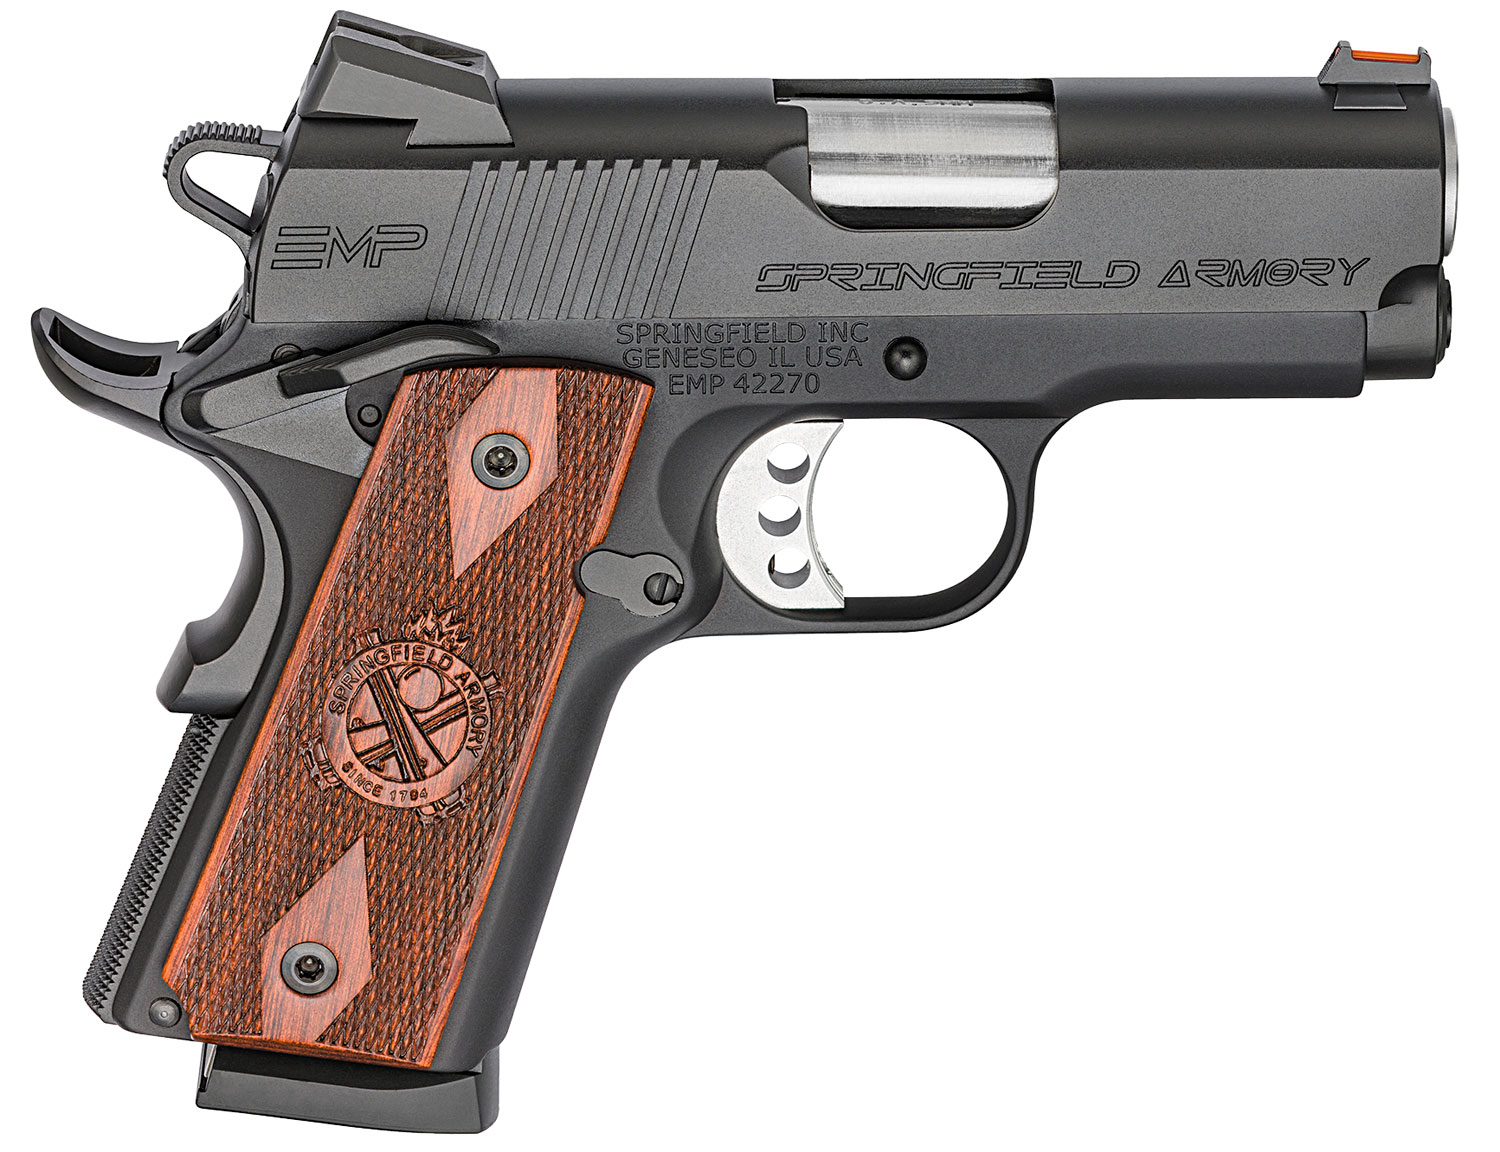 springfield compact 9mm